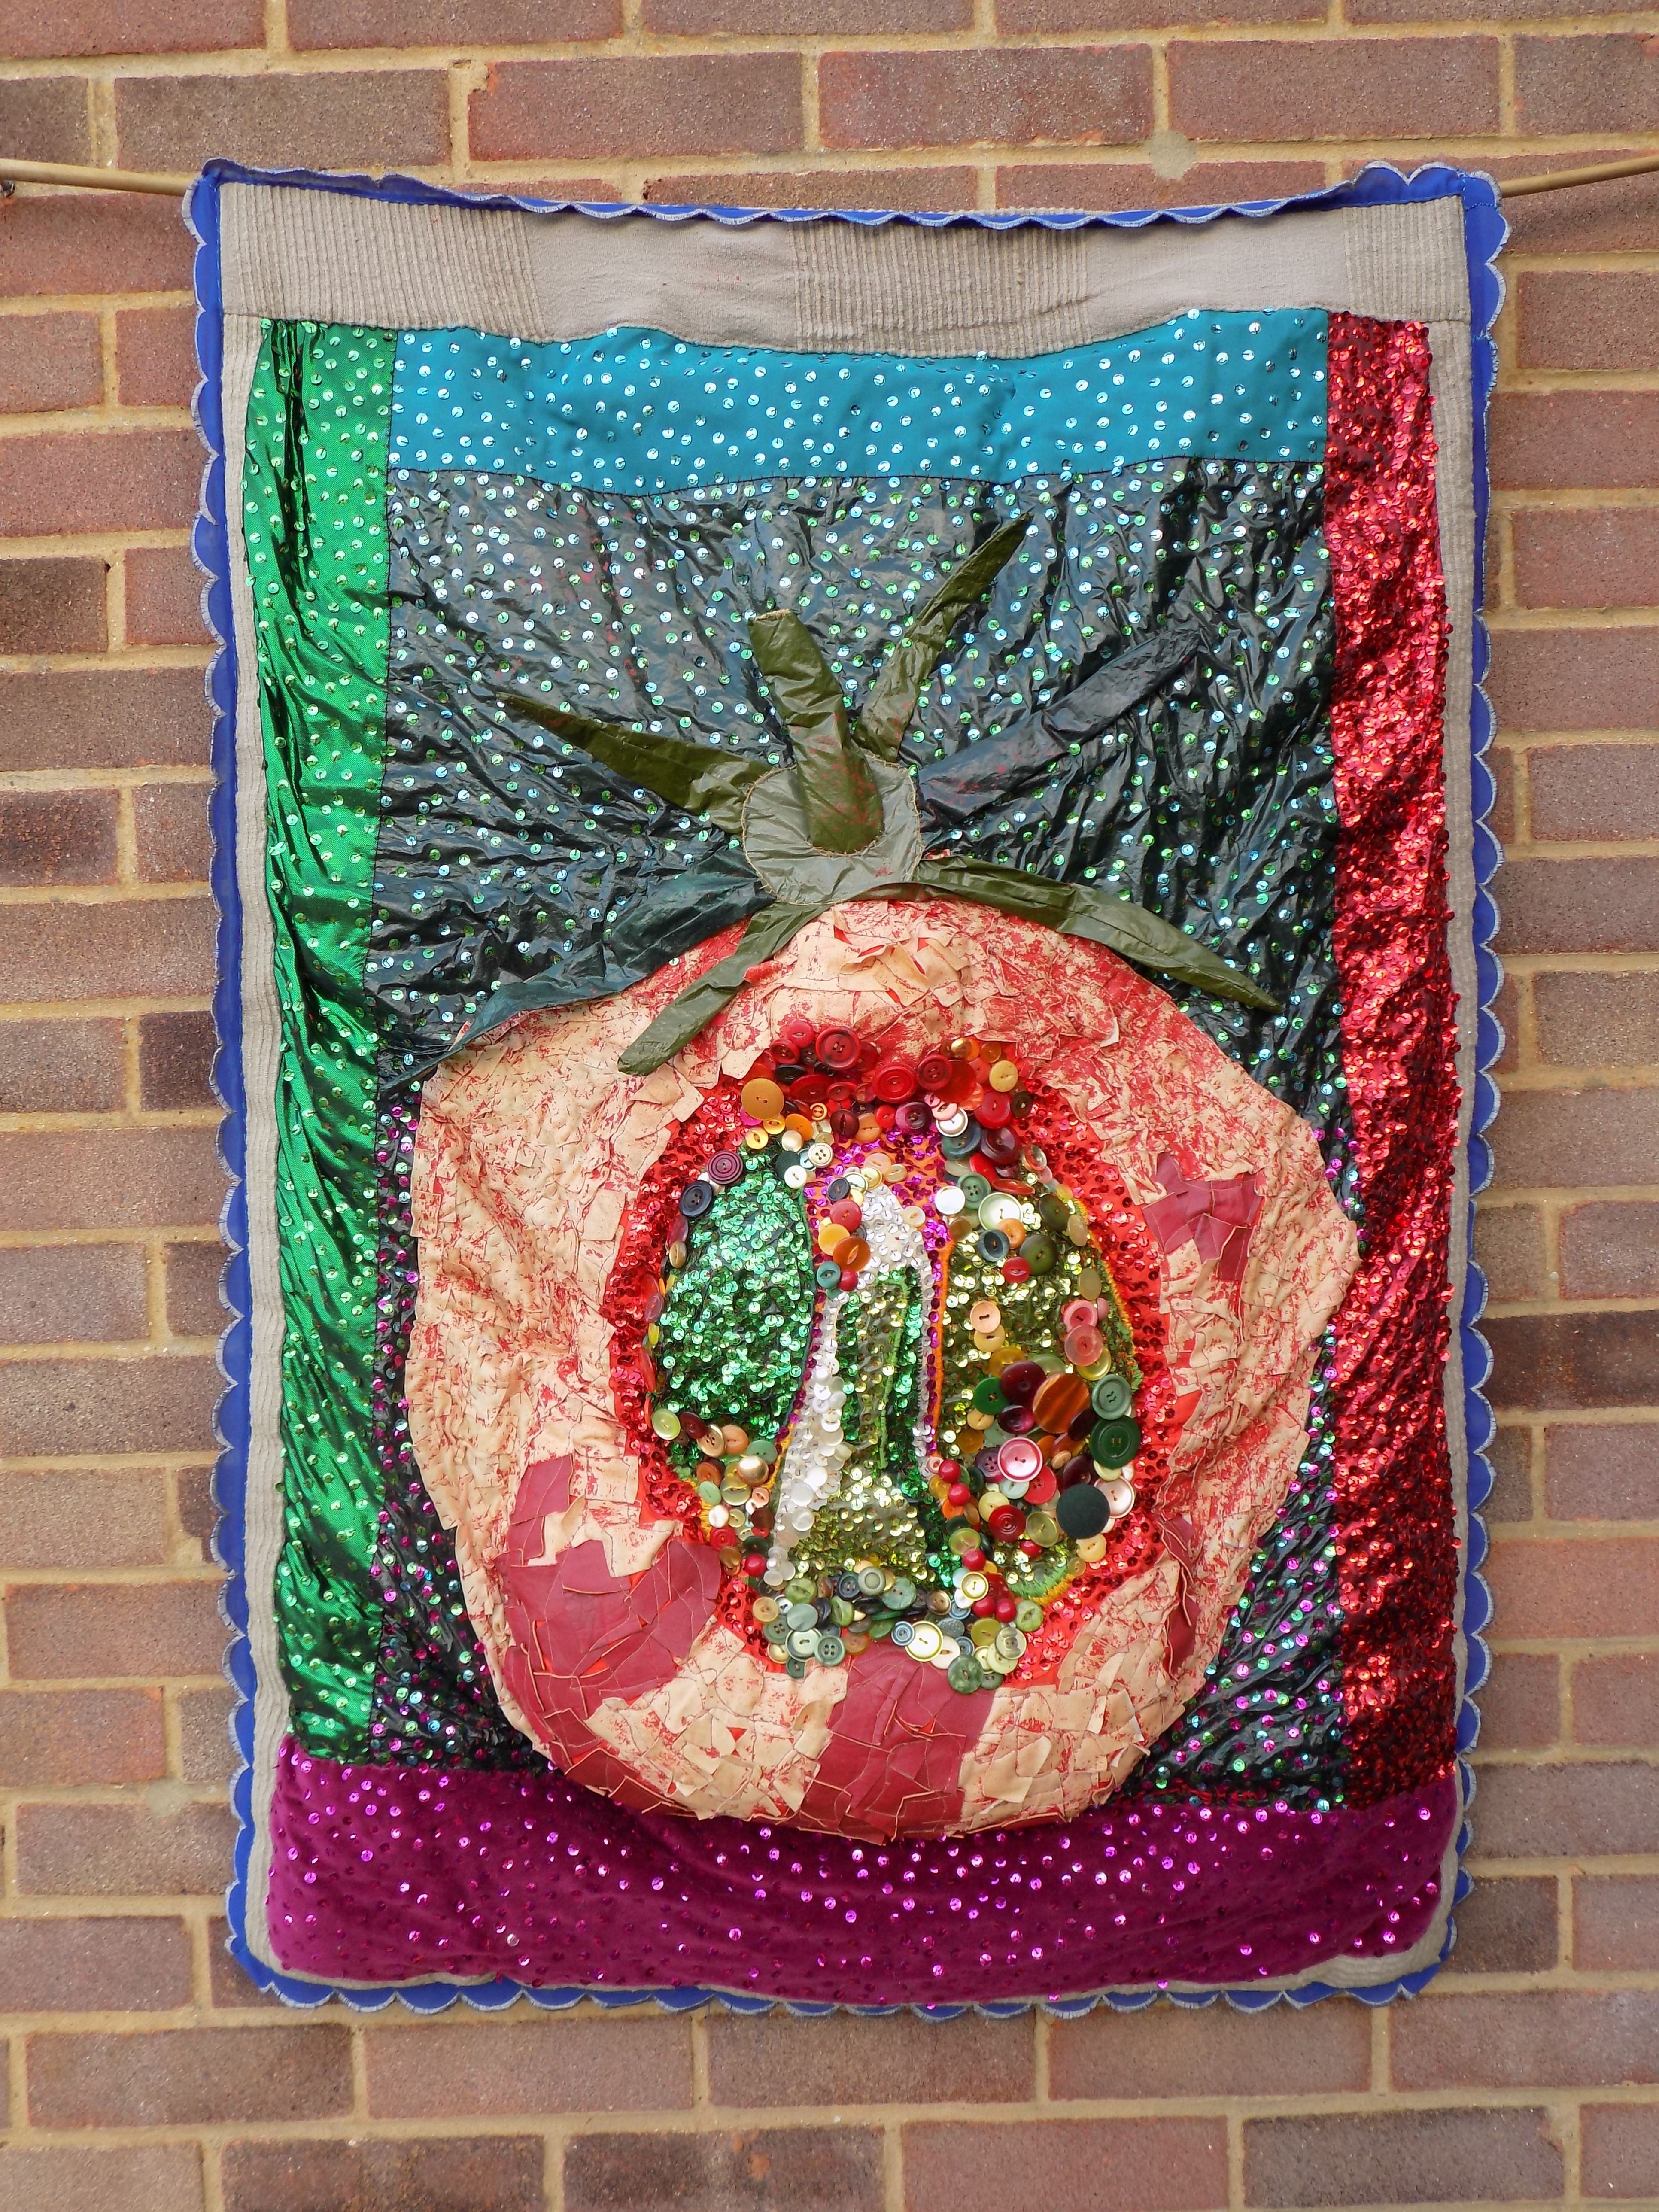 Christine Cunningham: 'tomato', 2017 Textile Art, Abstract. Abstract creation of the tomato in an explorative 3D padded applique, heavily embellished in buttons and sequins.  Vibrant colour palette of ivory, reds and greens.  Real depth achieved in the 3D structure, with padded and cavity areas to explore.  Eroded rubber, leather and plastics were used for skin and background.  ...